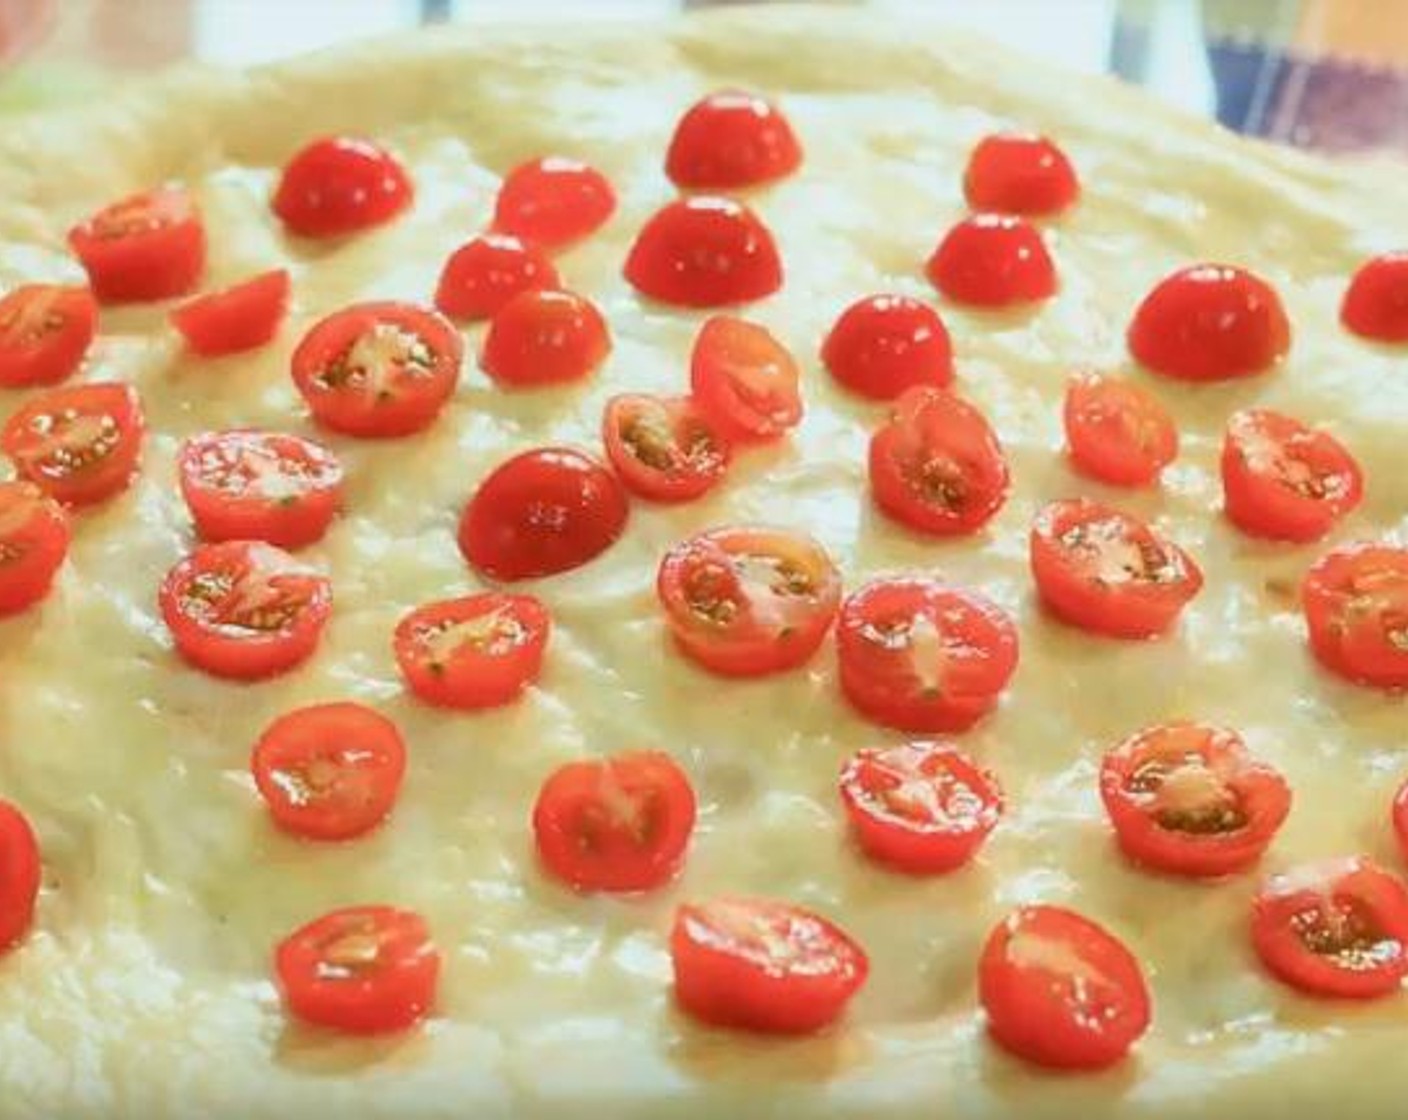 step 3 Flatten your dough into a circular shape, then sprinkle some Olive Oil (1 Tbsp) on top. Cut your Tomatoes (4) into pieces, and put them on top of the dough as well.